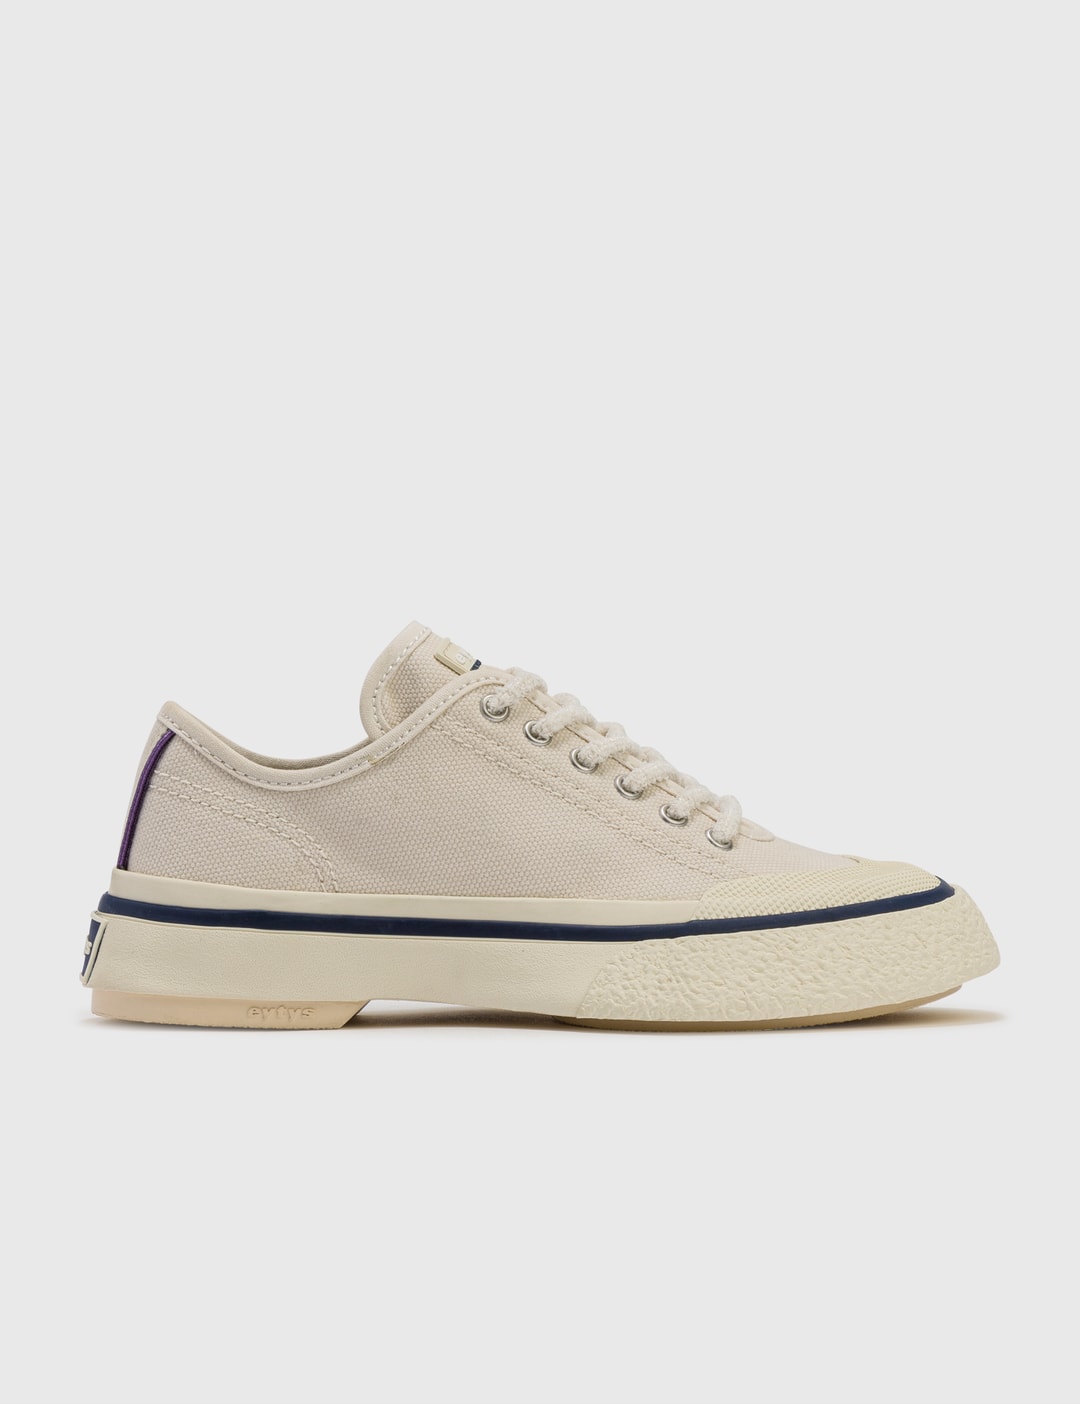 Eytys - Laguna Canvas Sneakers | HBX - Globally Curated Fashion and ...